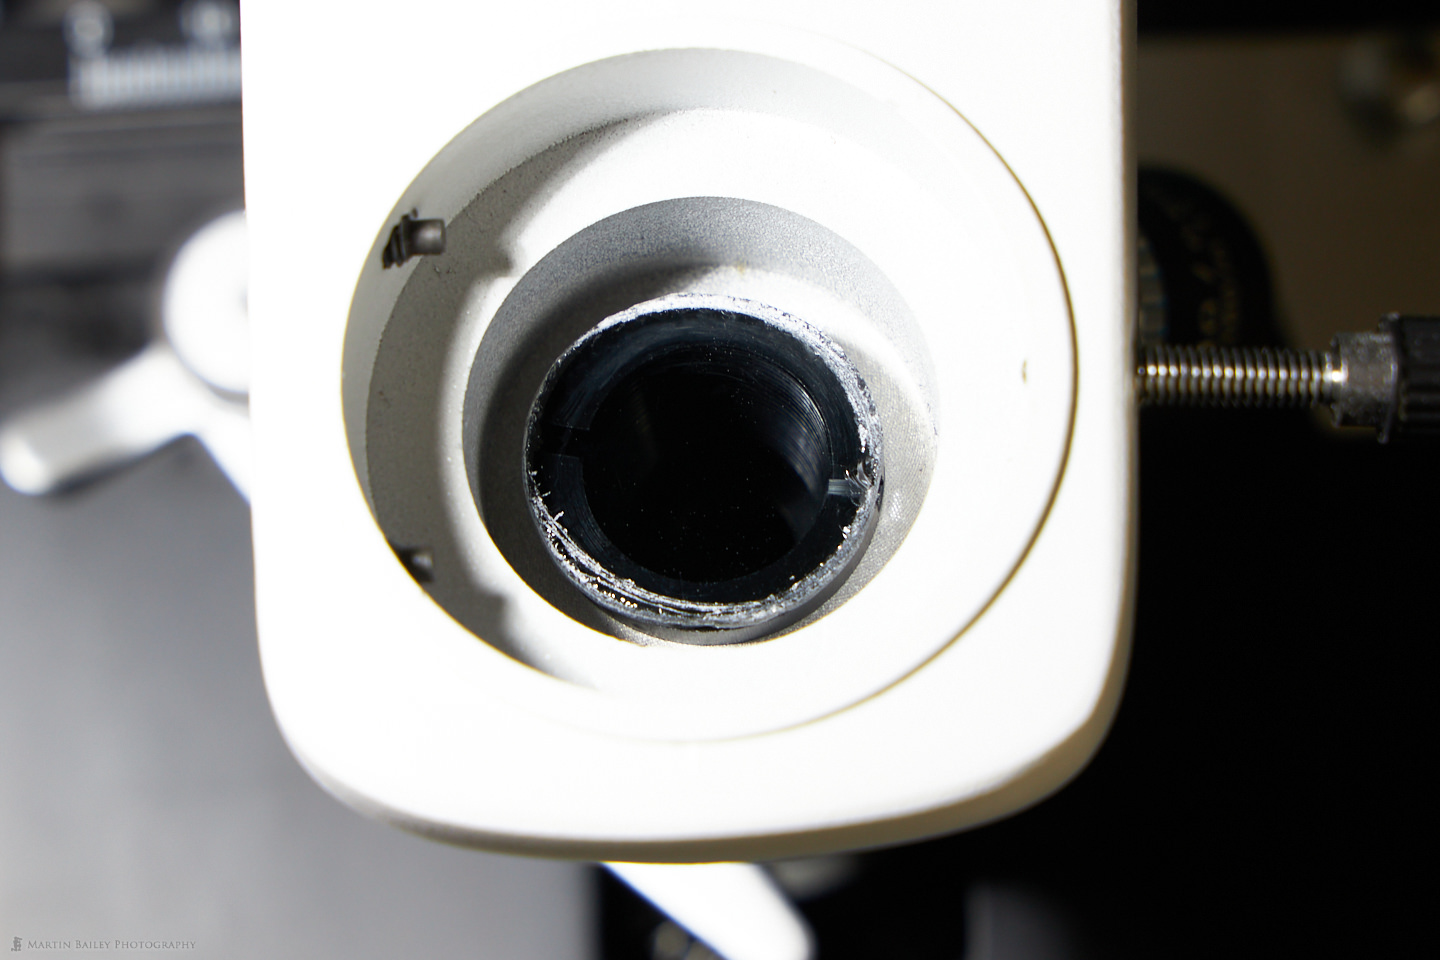 Second Polarizer Between Objective Lens Turret and Head